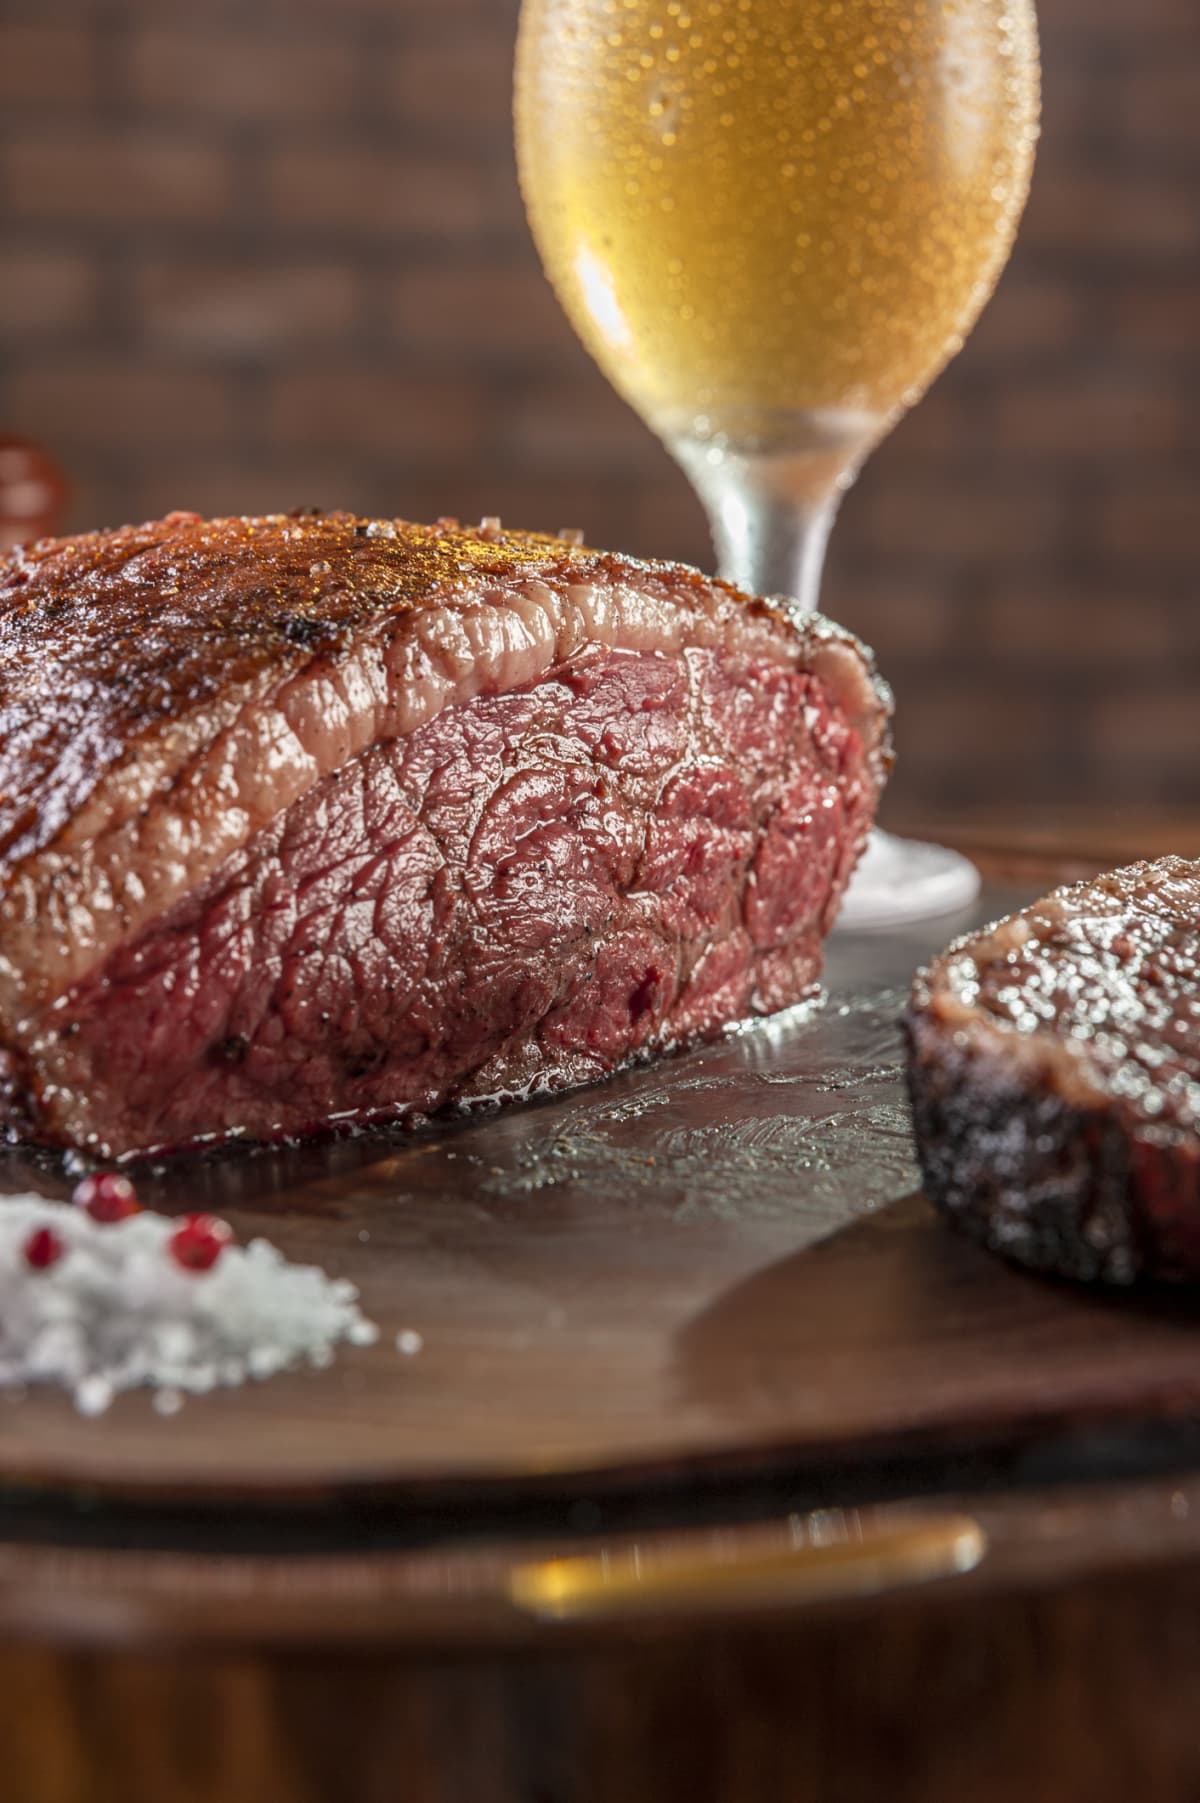 Closeup of steak next to glass of beer